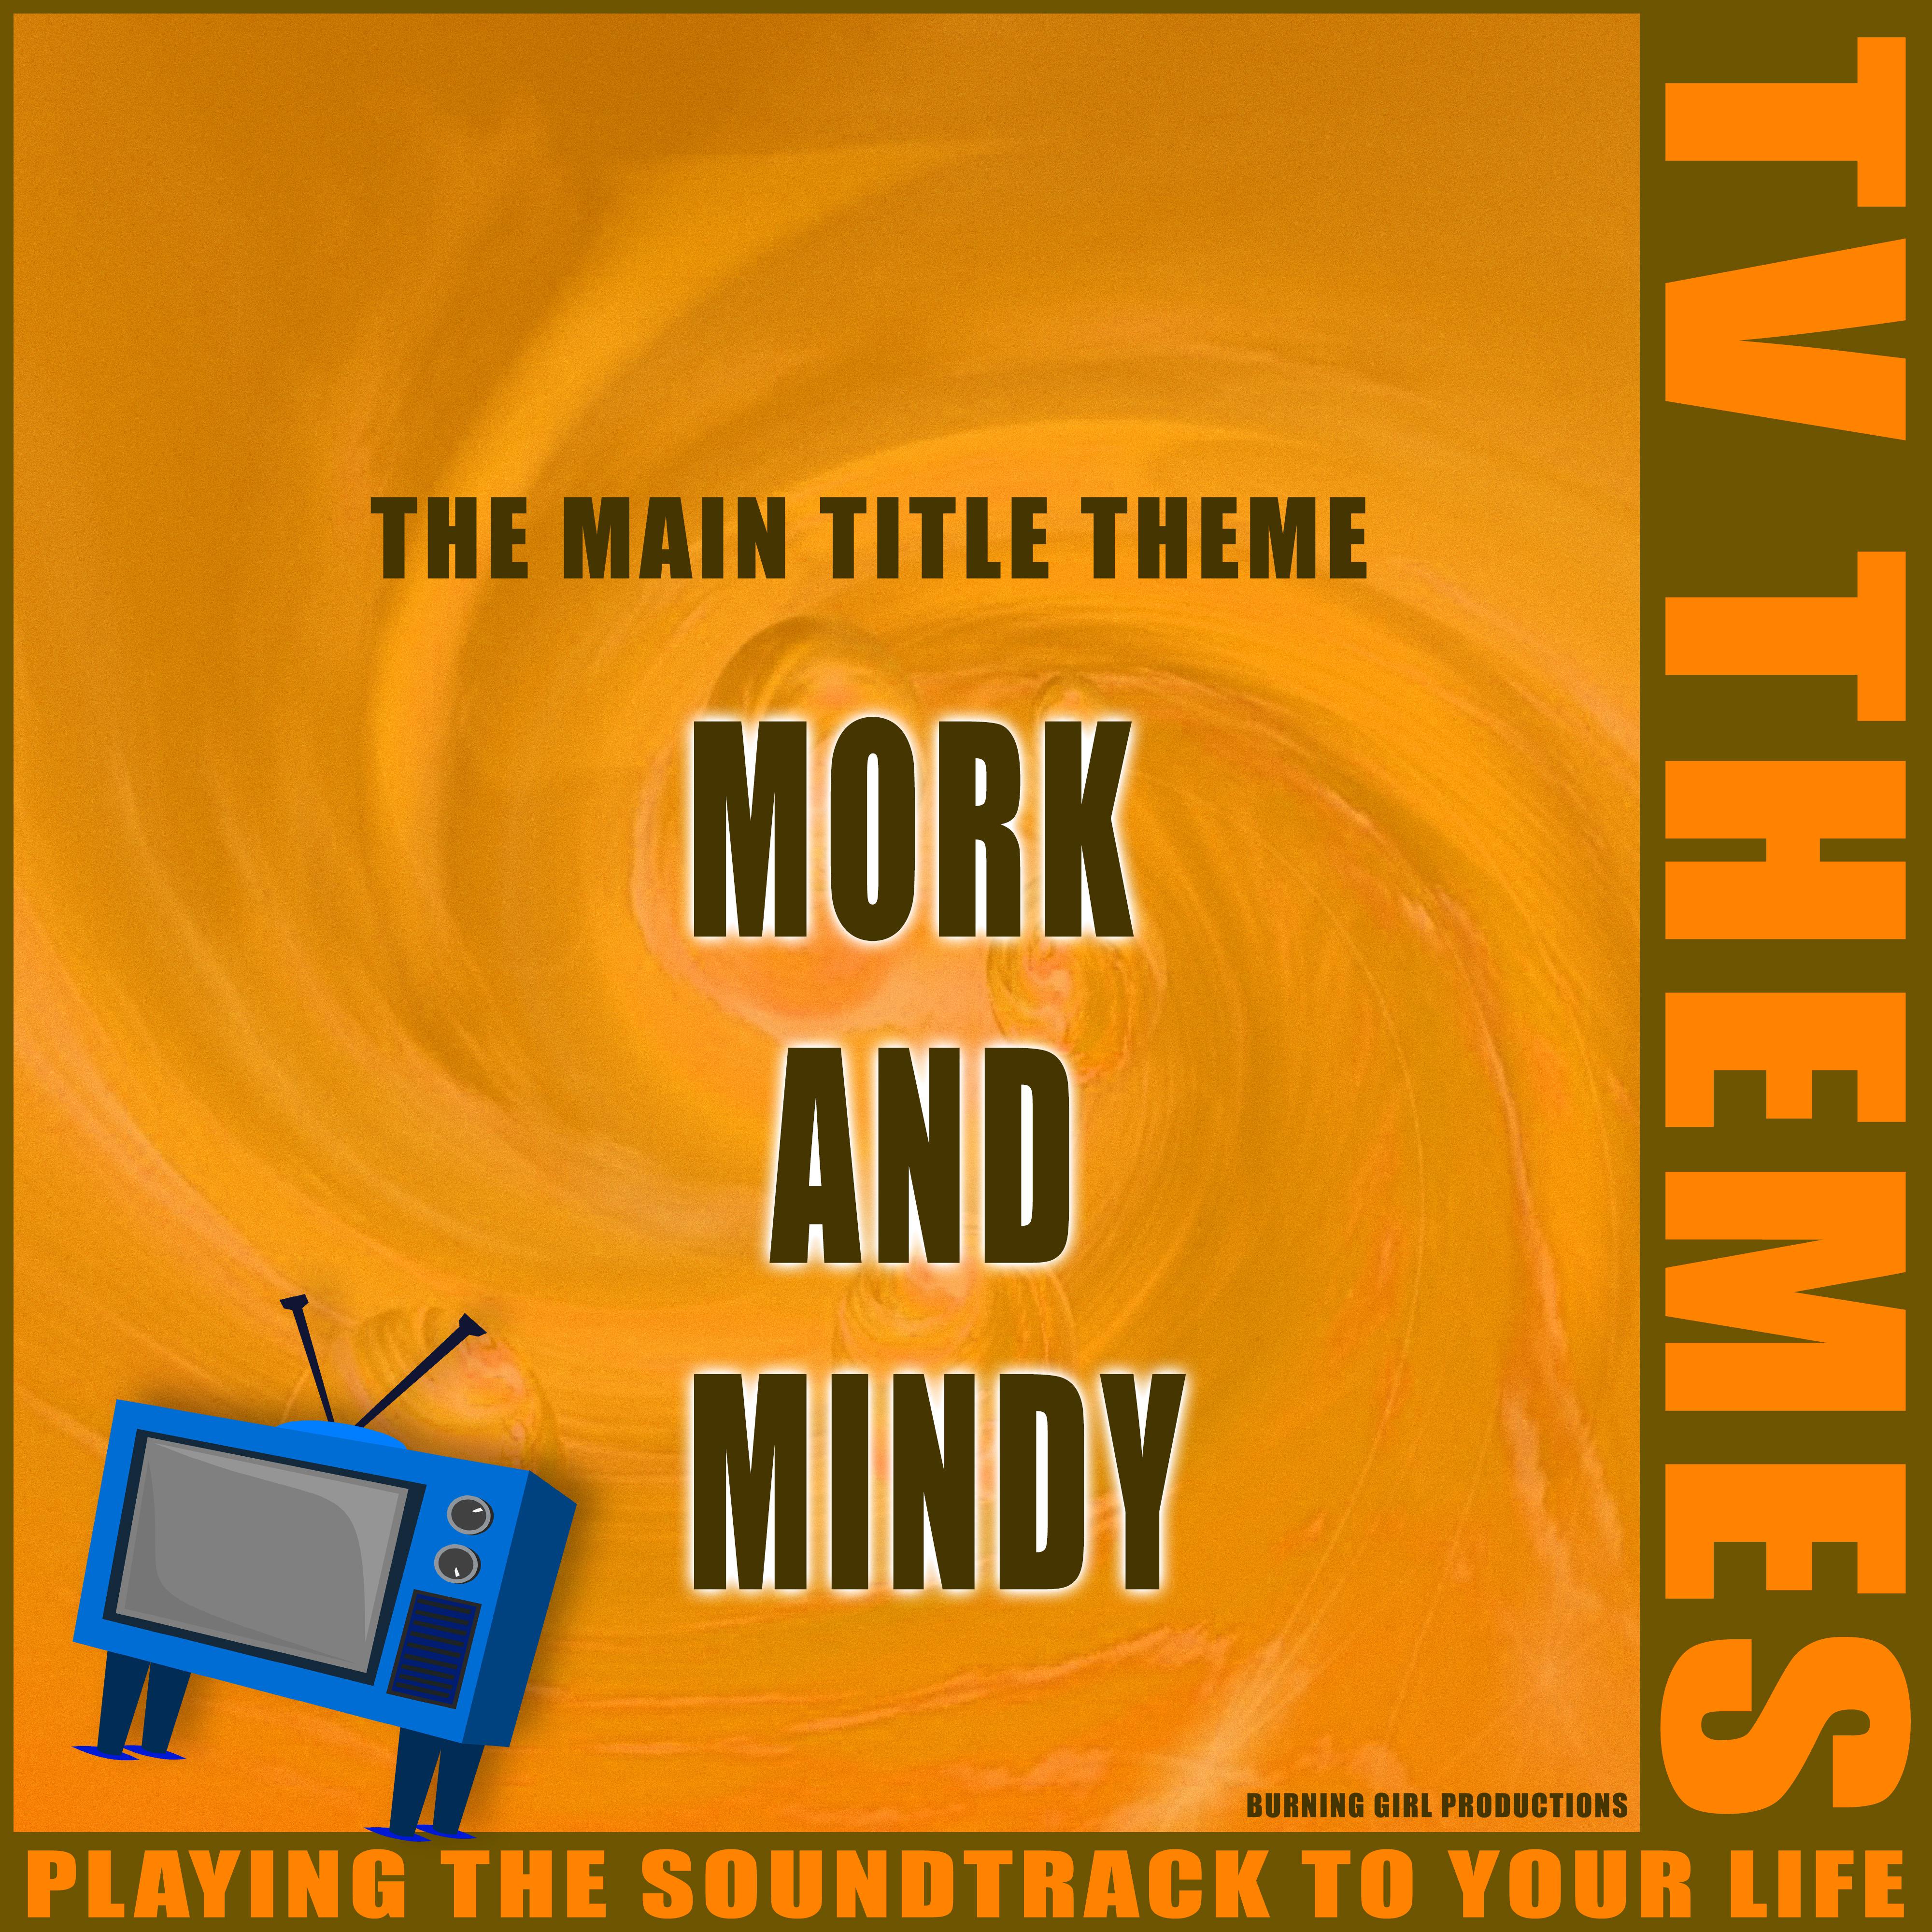 The Main Title Theme - Mork and Mindy